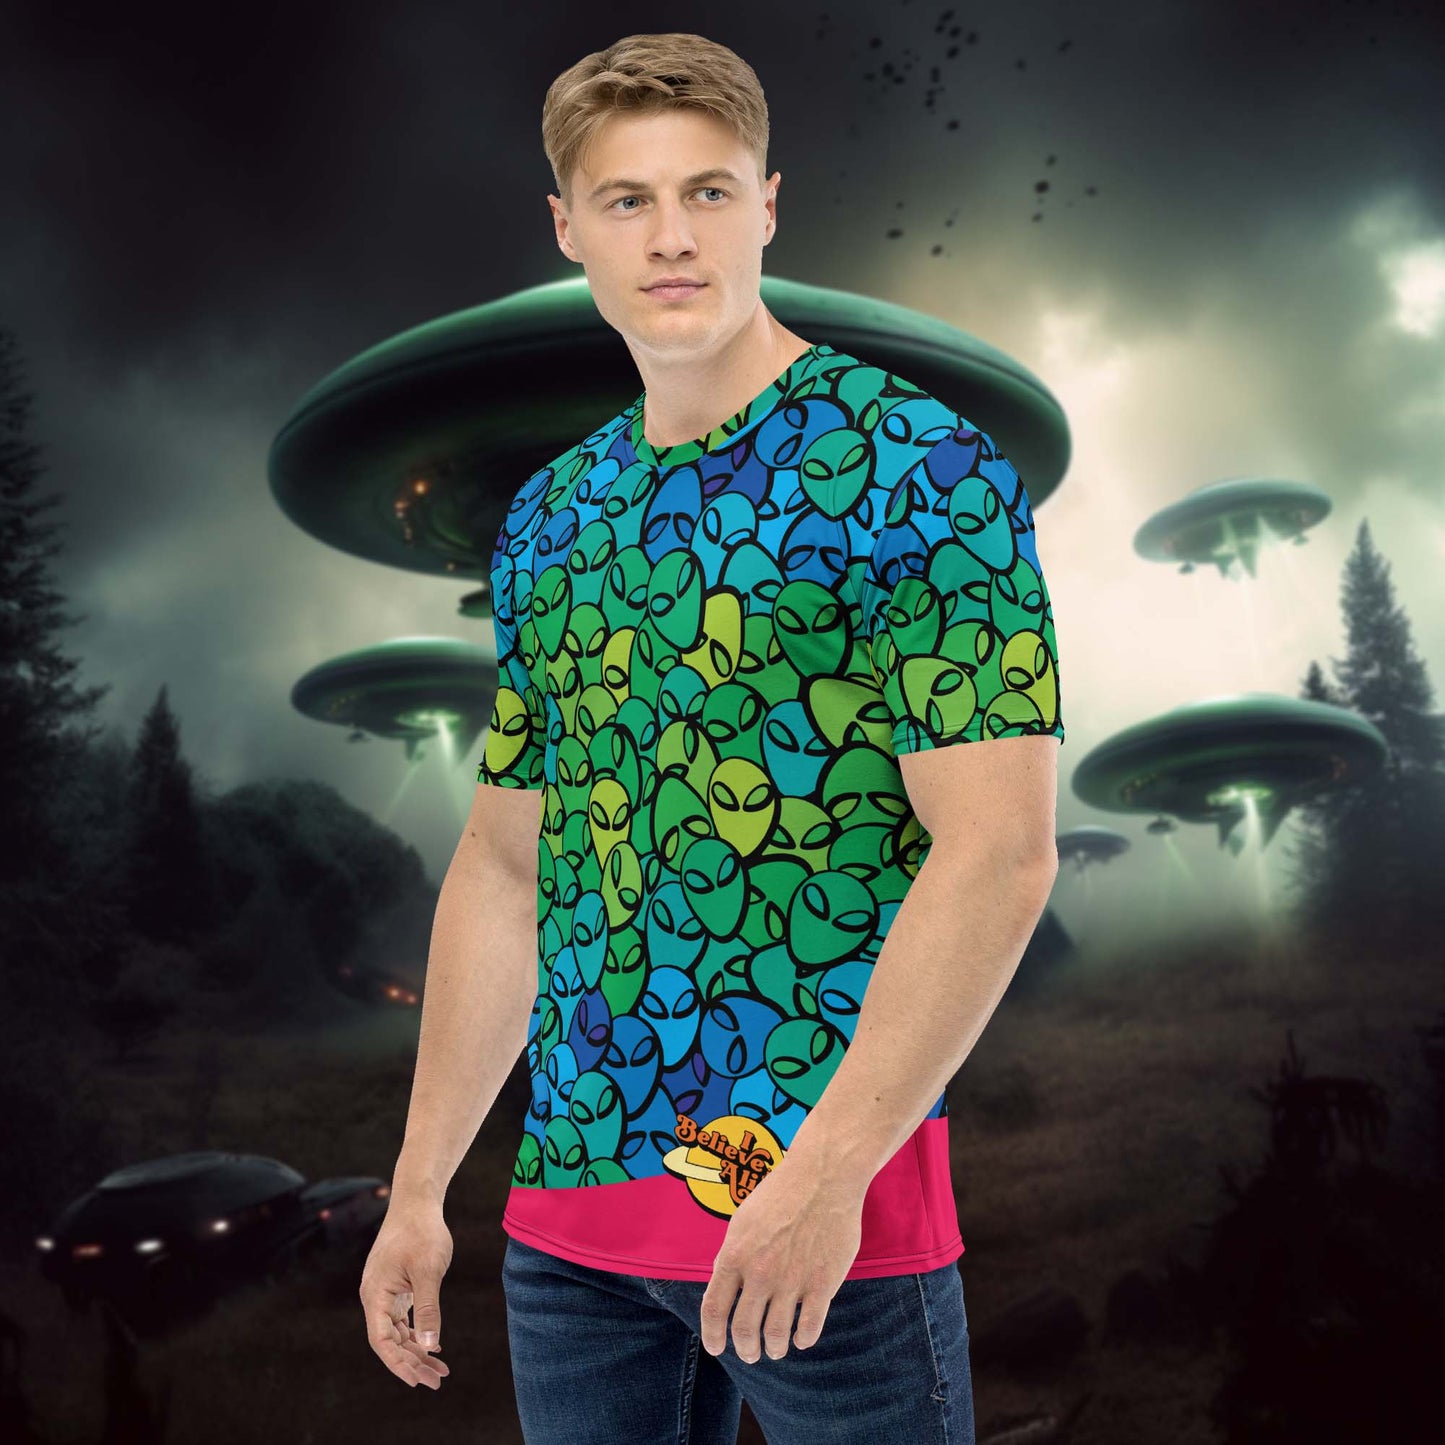 This Aliens shirt for men has aliens printed all over the t-shirt and has a bright pink bottom and the 'I believe in Aliens' meme at the left bottom.